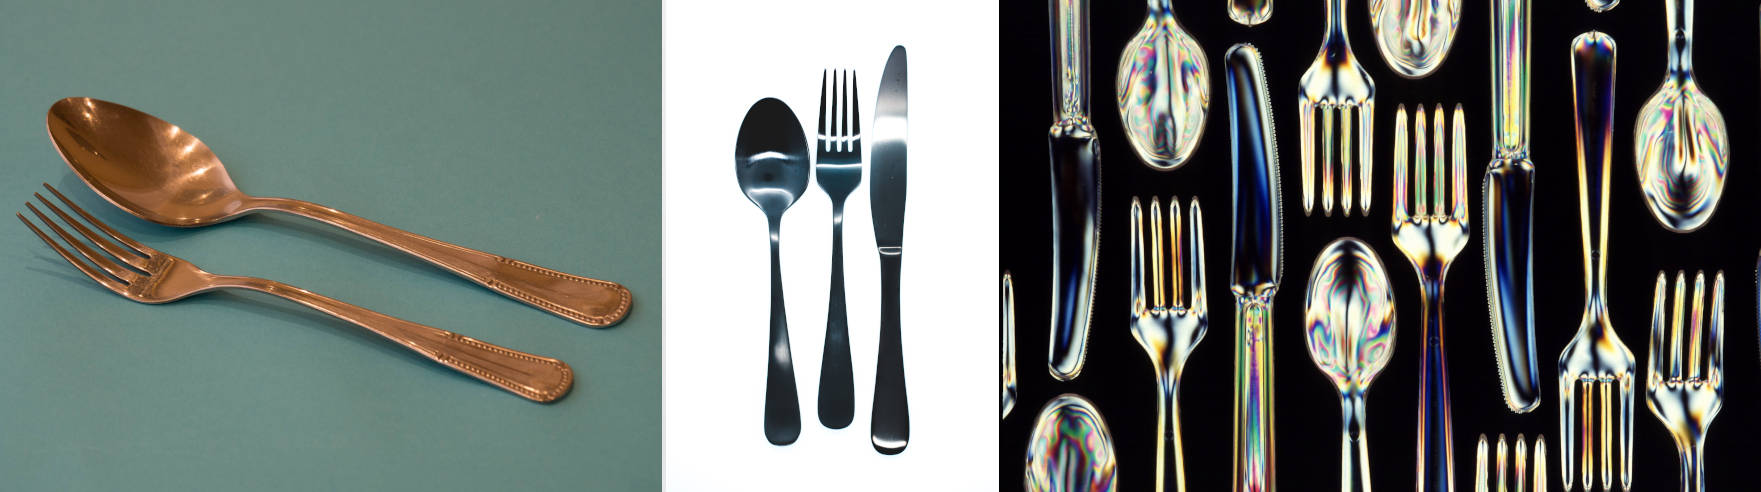 PVD treated flatware and kitchen tools CM group